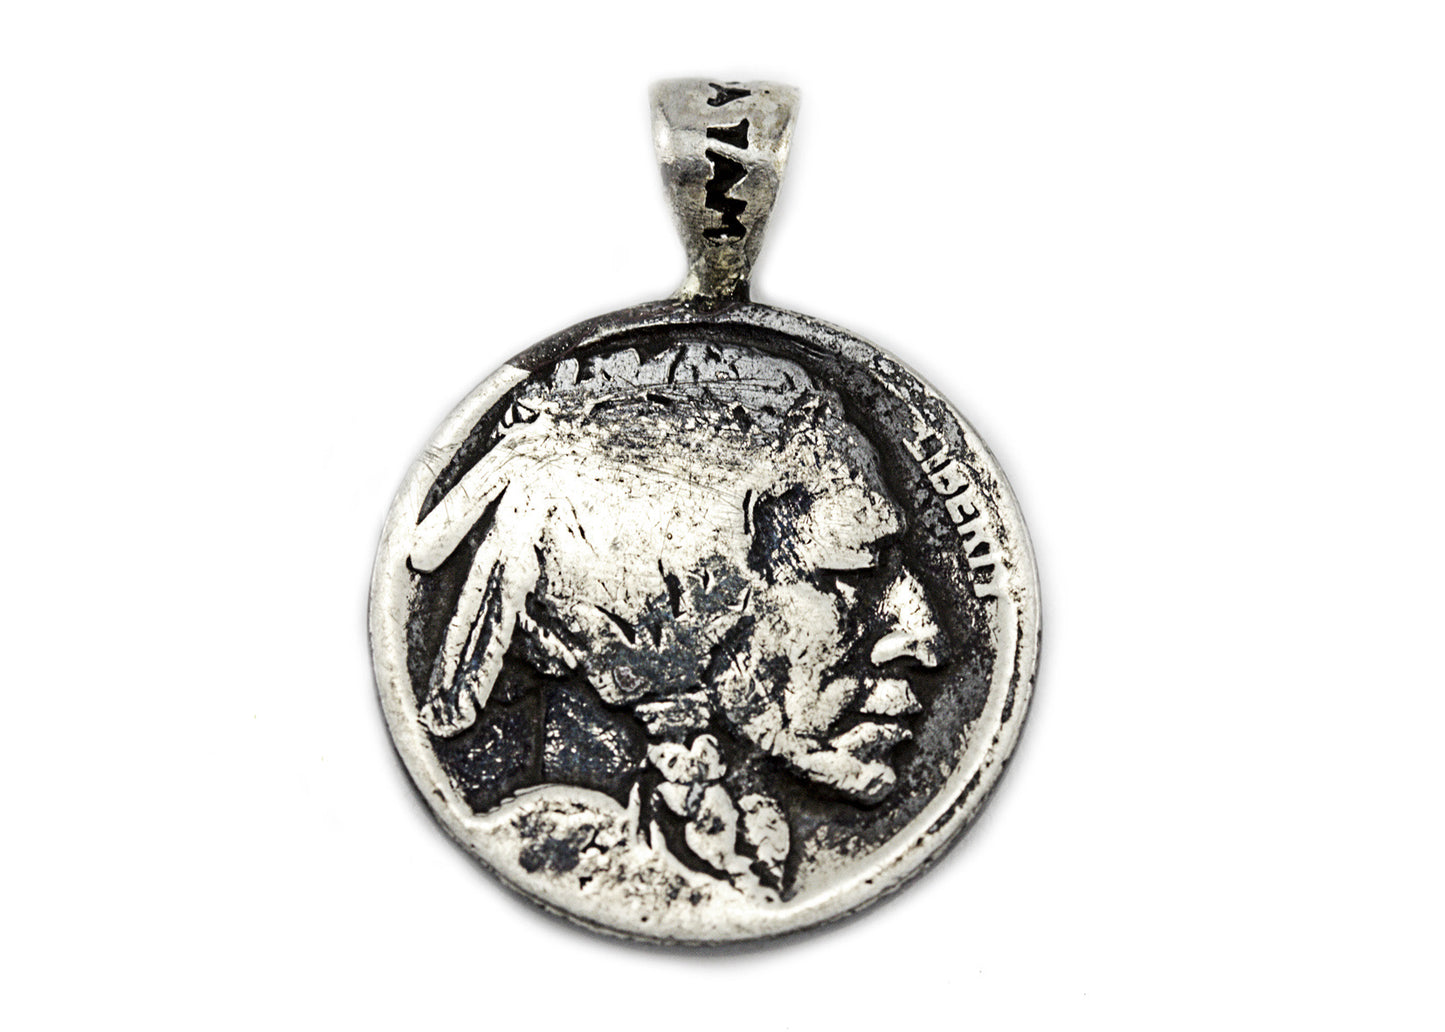 Coin Pendant with the Surfer coin medallion and the Buffalo Nickel coin of USA